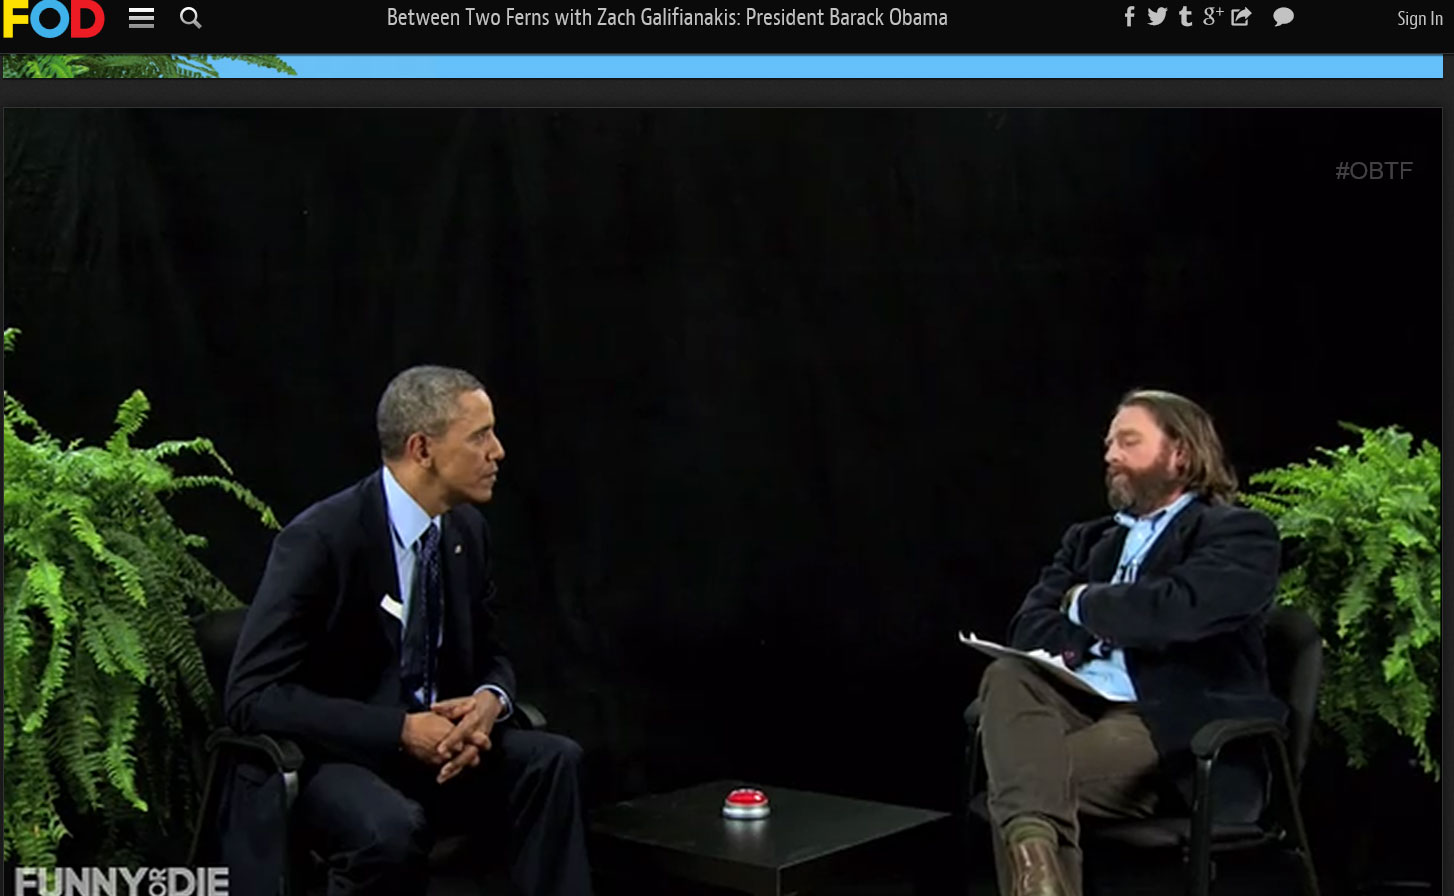 President Obama appears on Funny or Die 